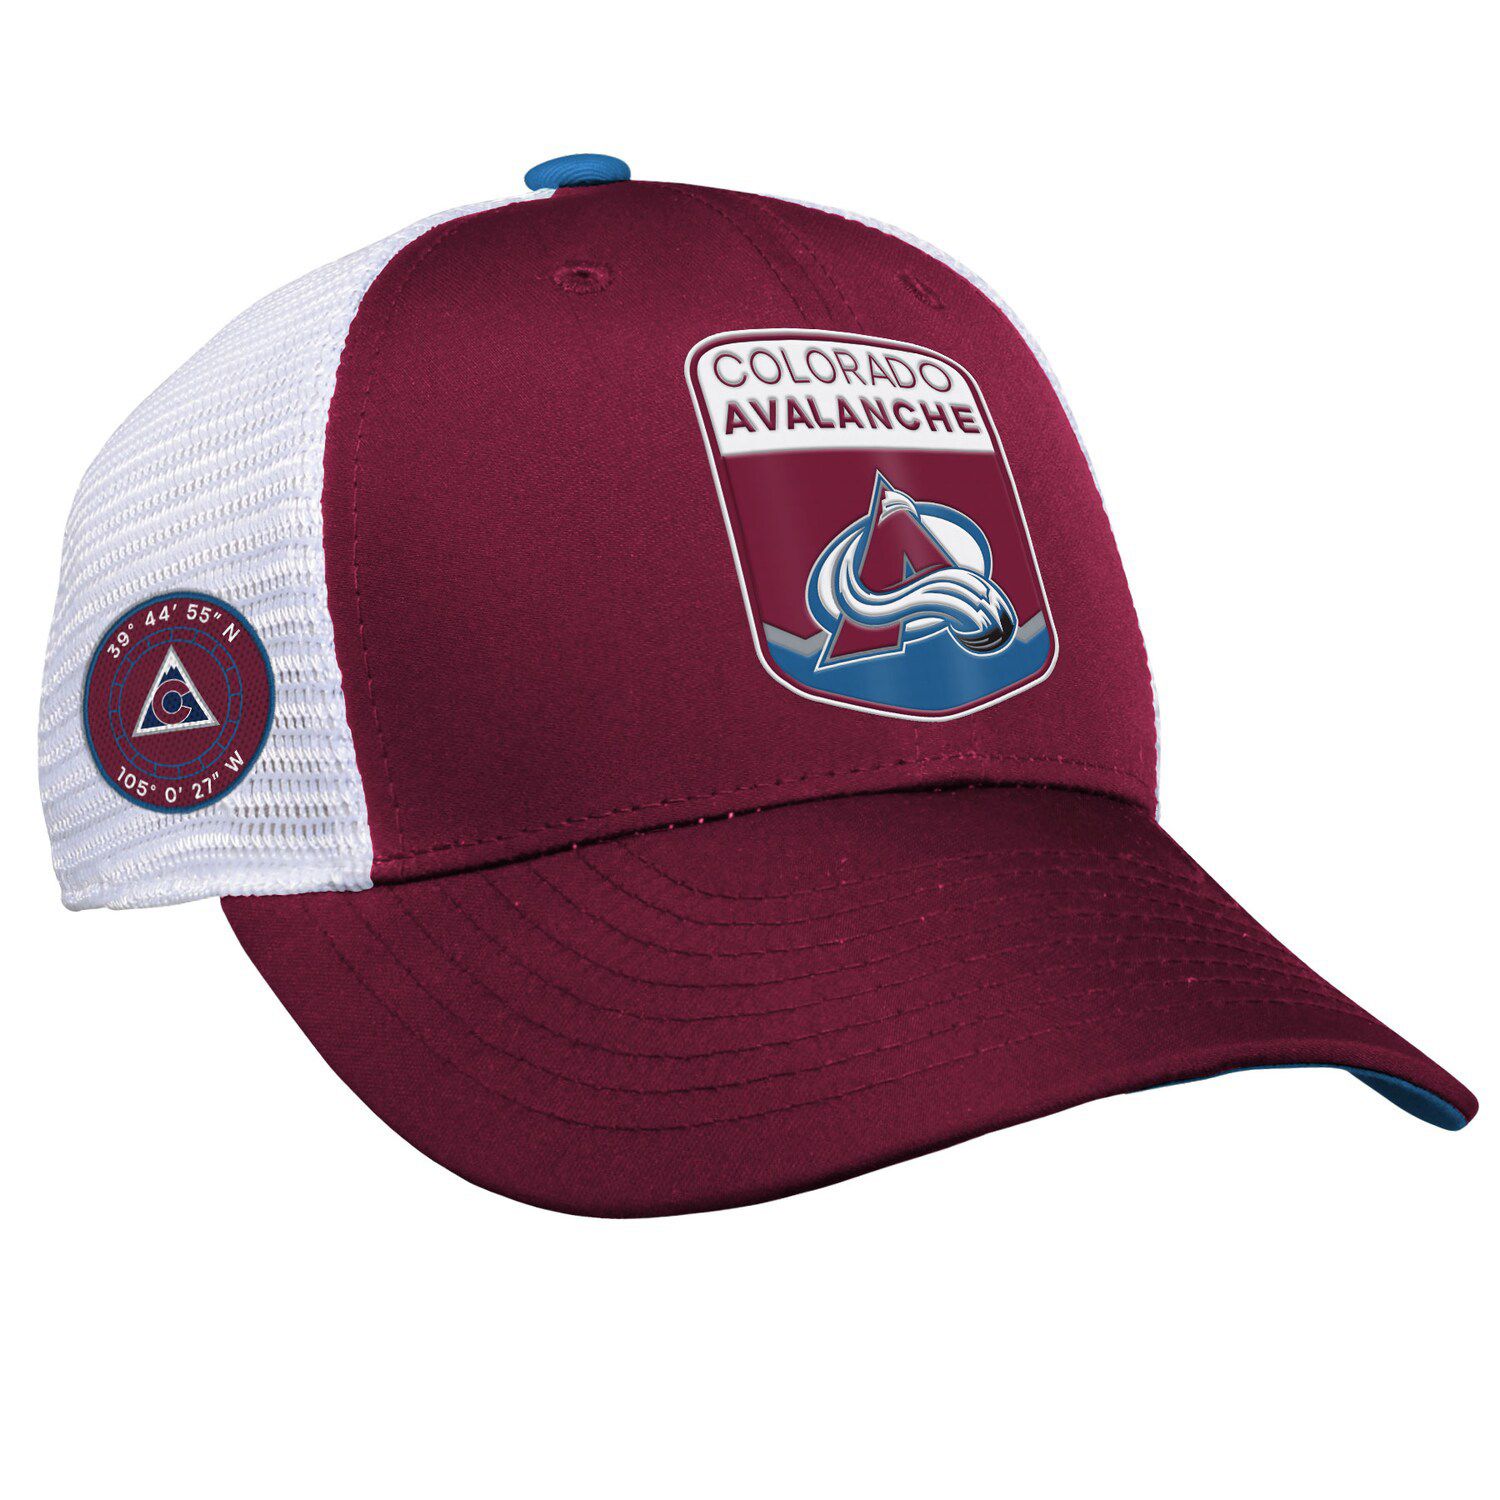 Colorado Avalanche In Your Face Deadstock White Snapback - Mitchell & Ness  cap